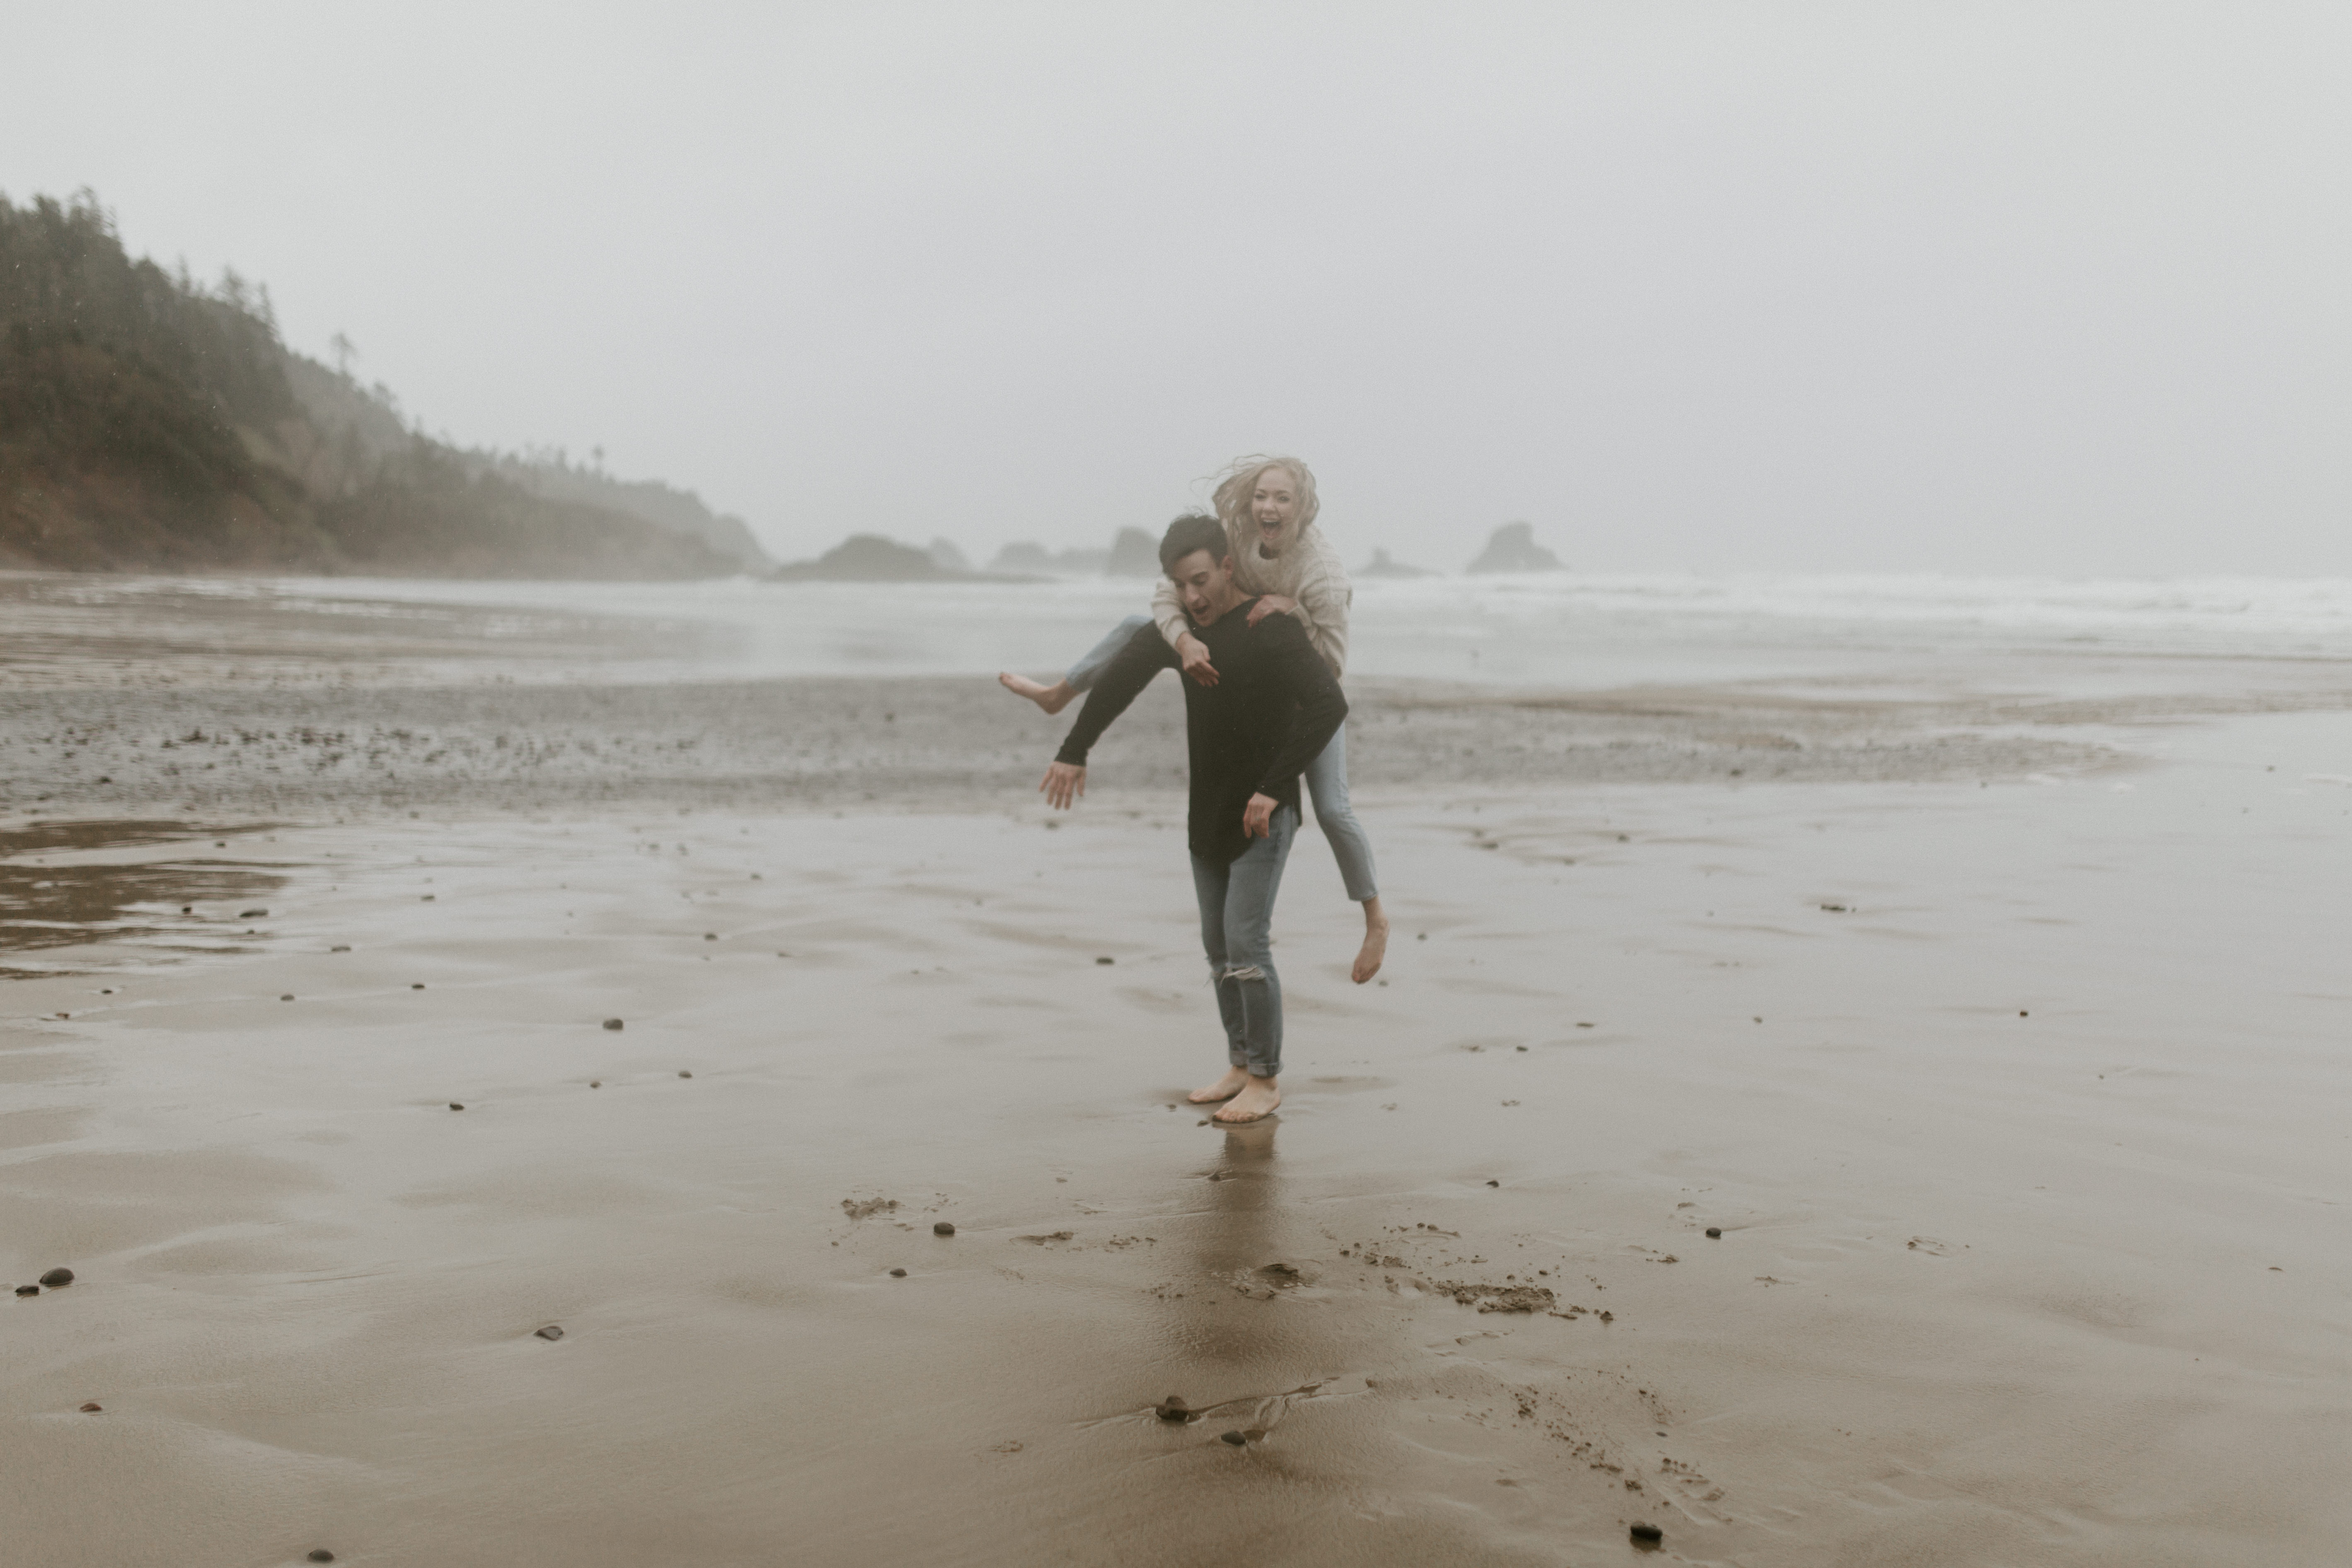 Grant gives Hannah a piggyback ride on Indian Beach in Ecola State Park, Oregon. Engagement photography in Oregon by Sienna Plus Josh.